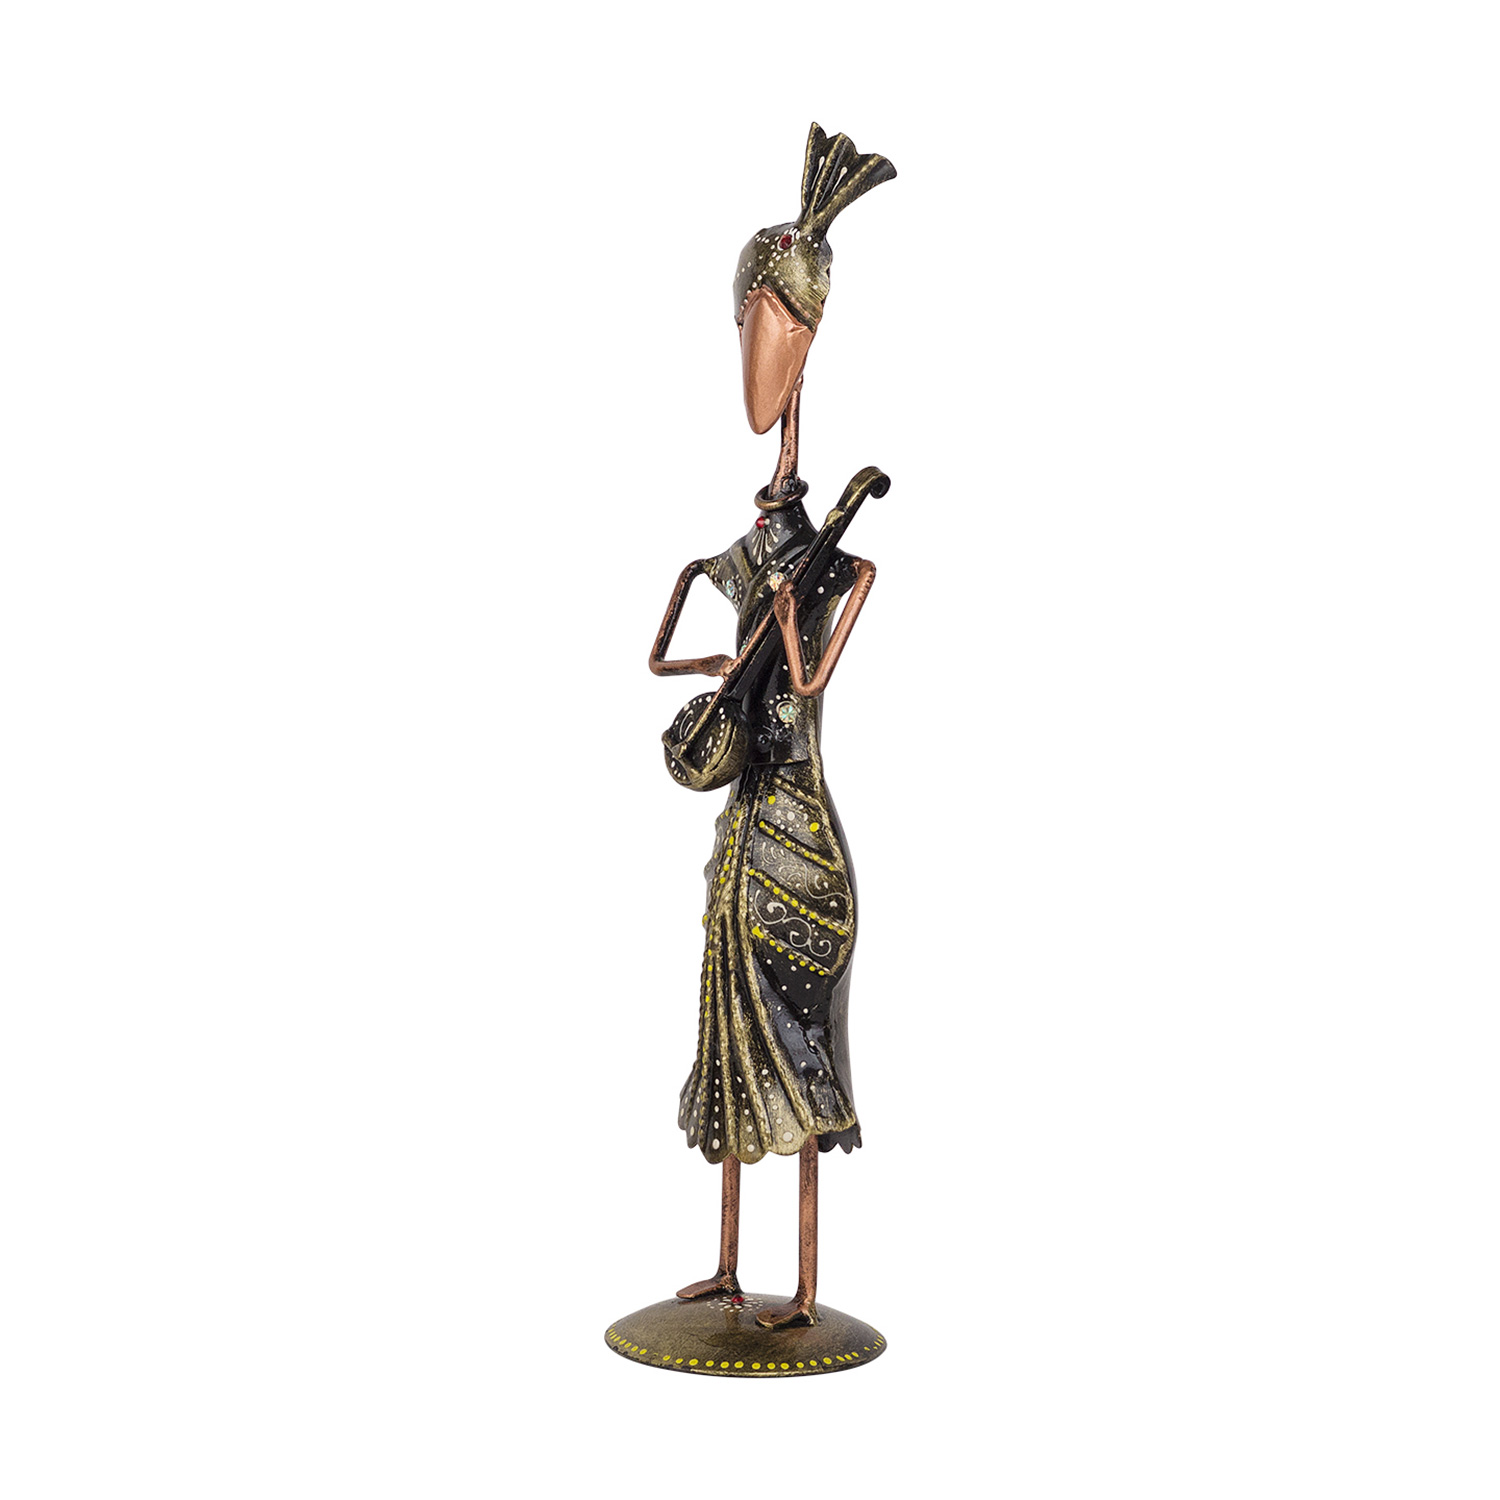 Antique Gold Plated Musician With Turban